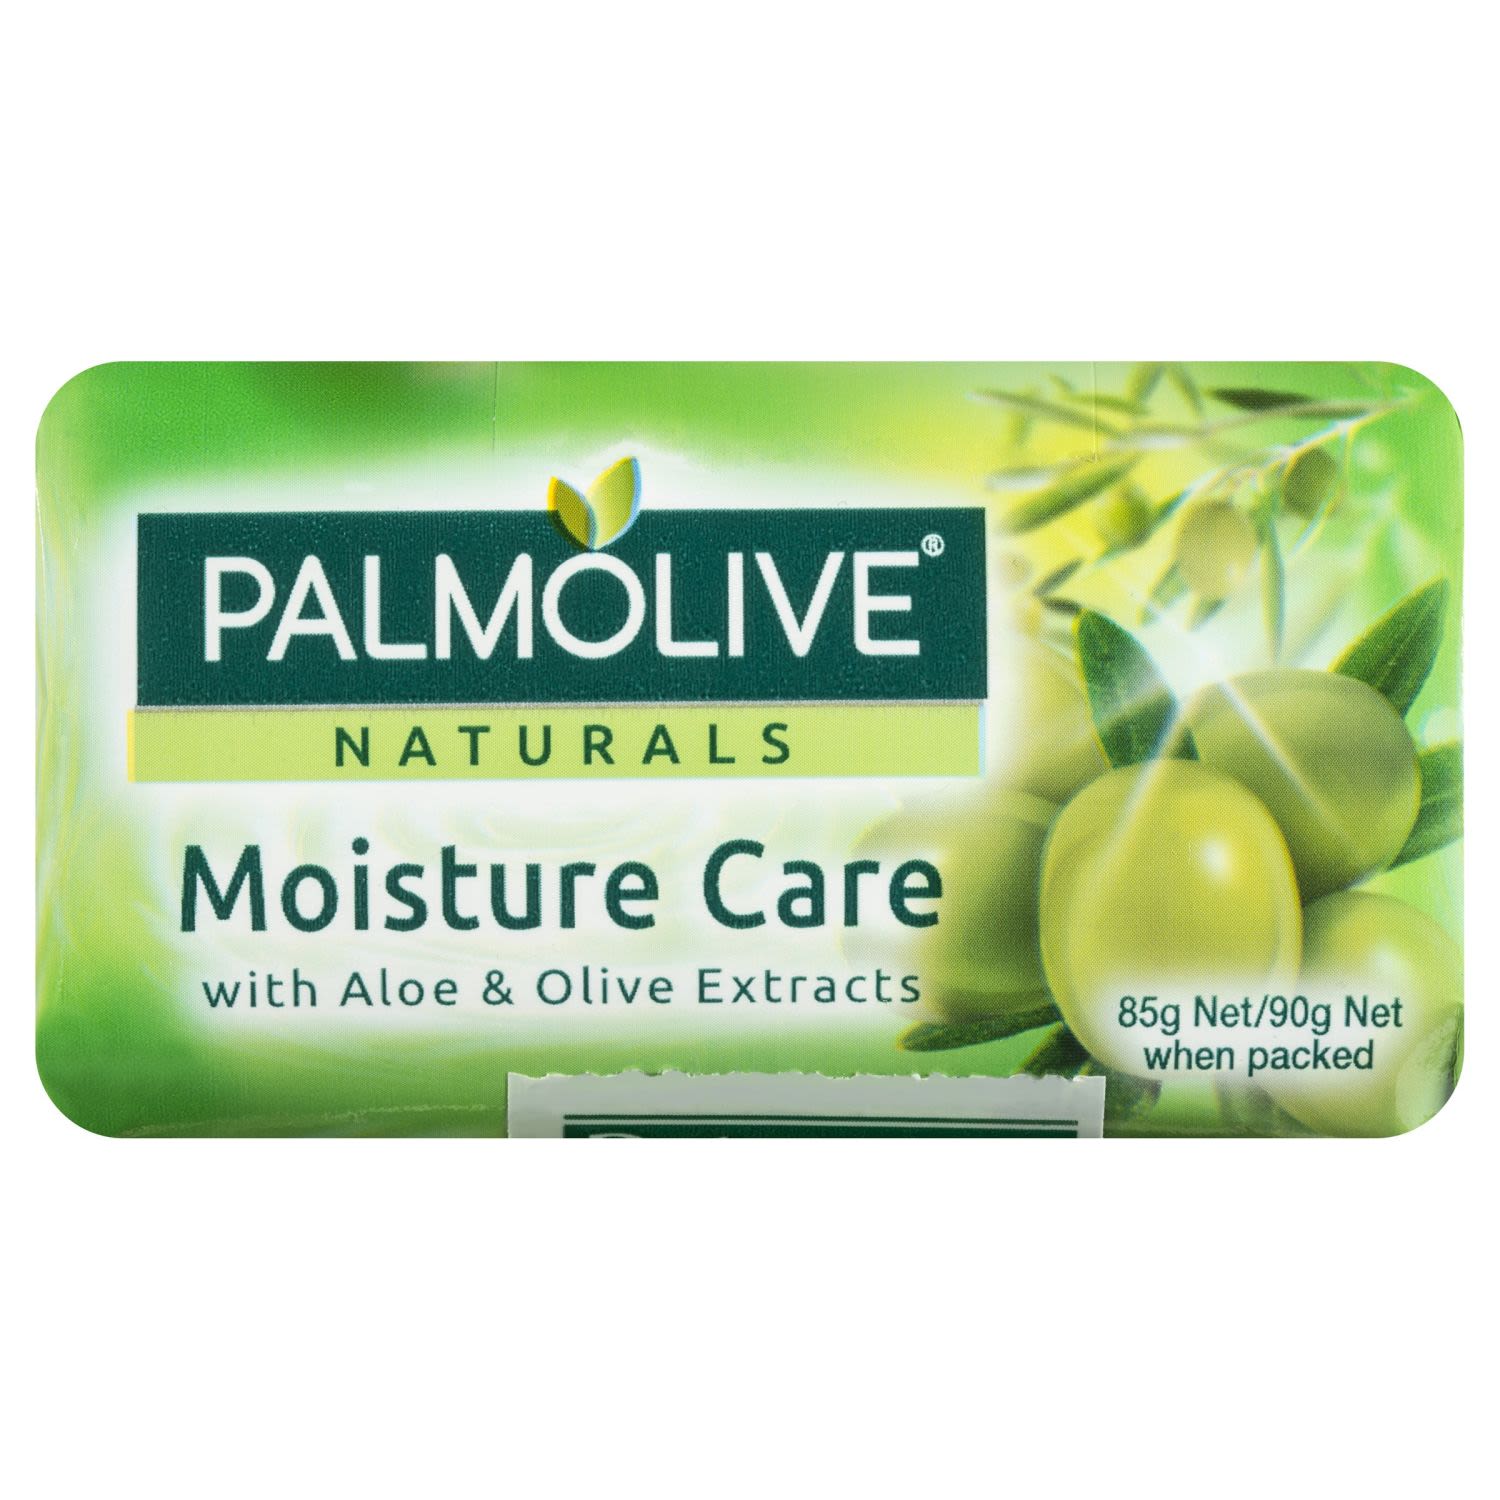 Palmolive Naturals Moisture Care Aloe & Olive Extracts Bar Soap, 4 Each